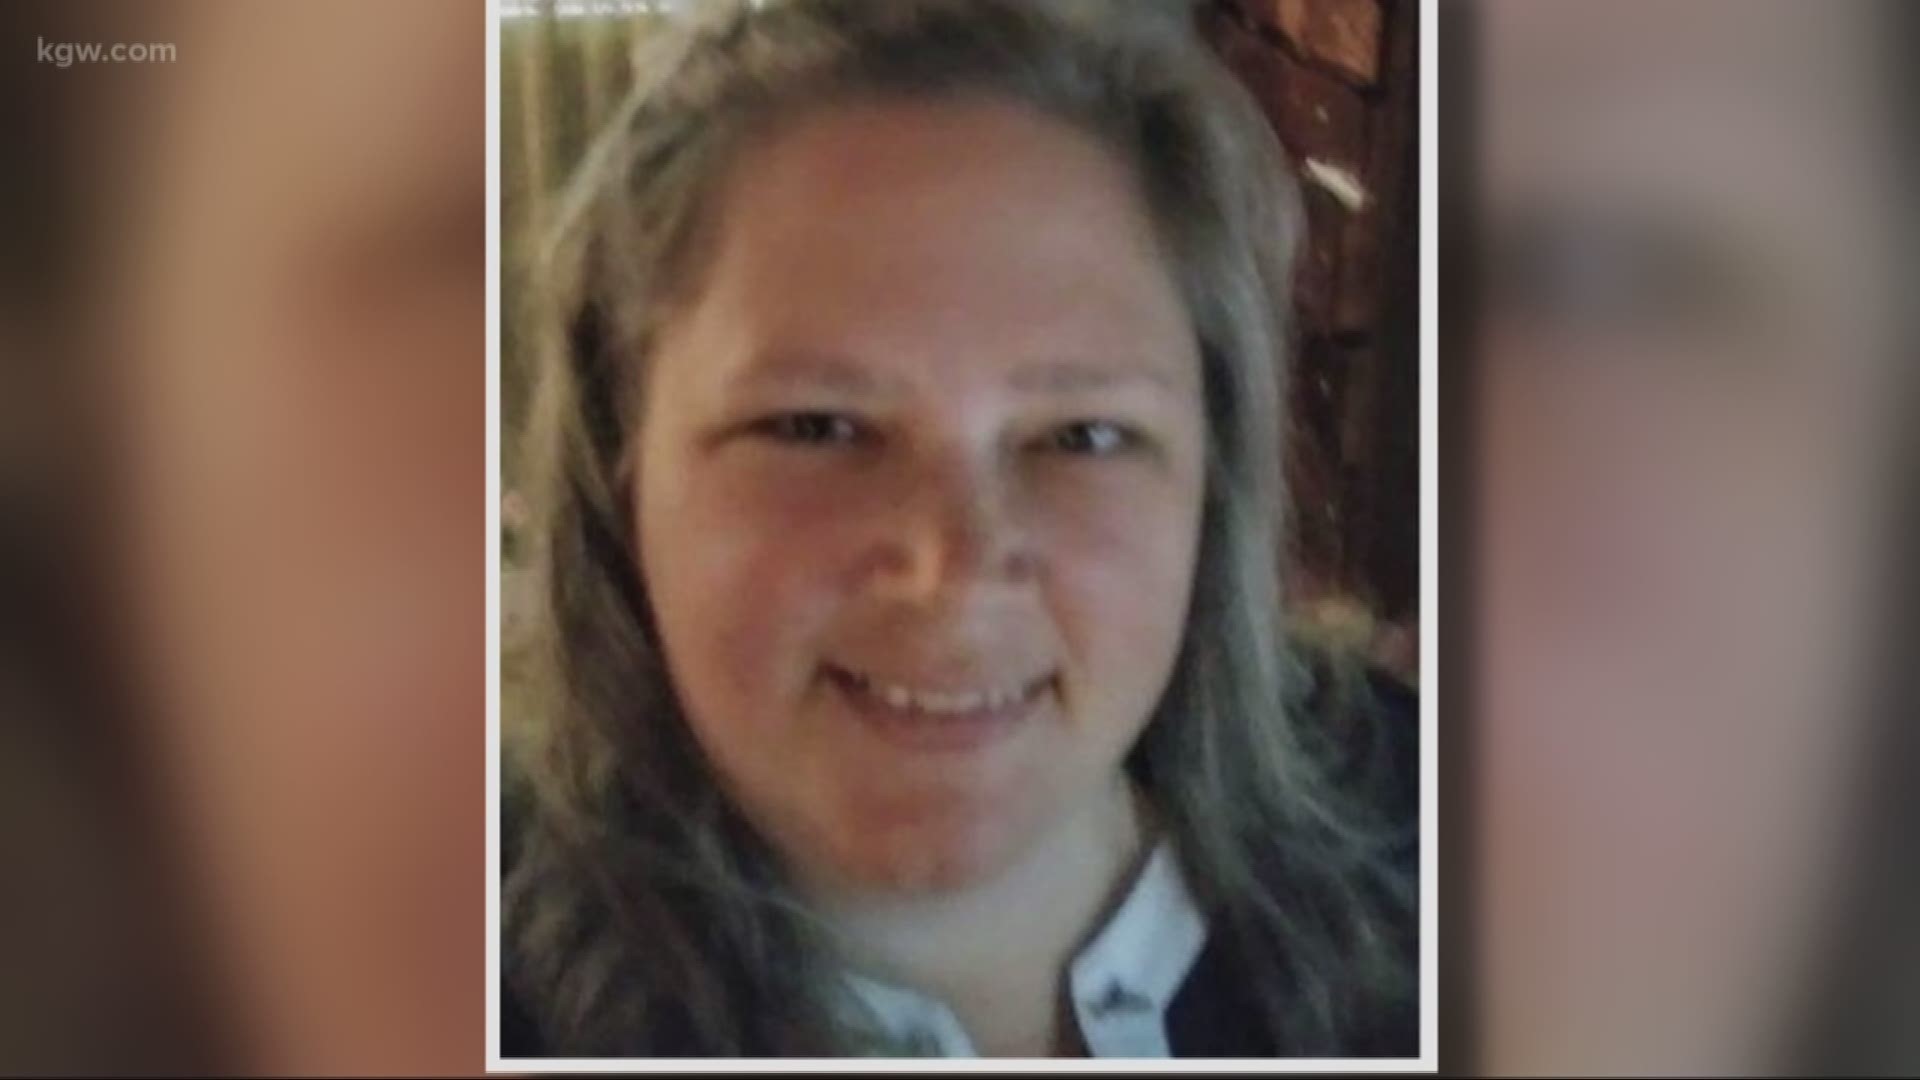 Erin McClintock returned home Tuesday. It's unclear where she went.